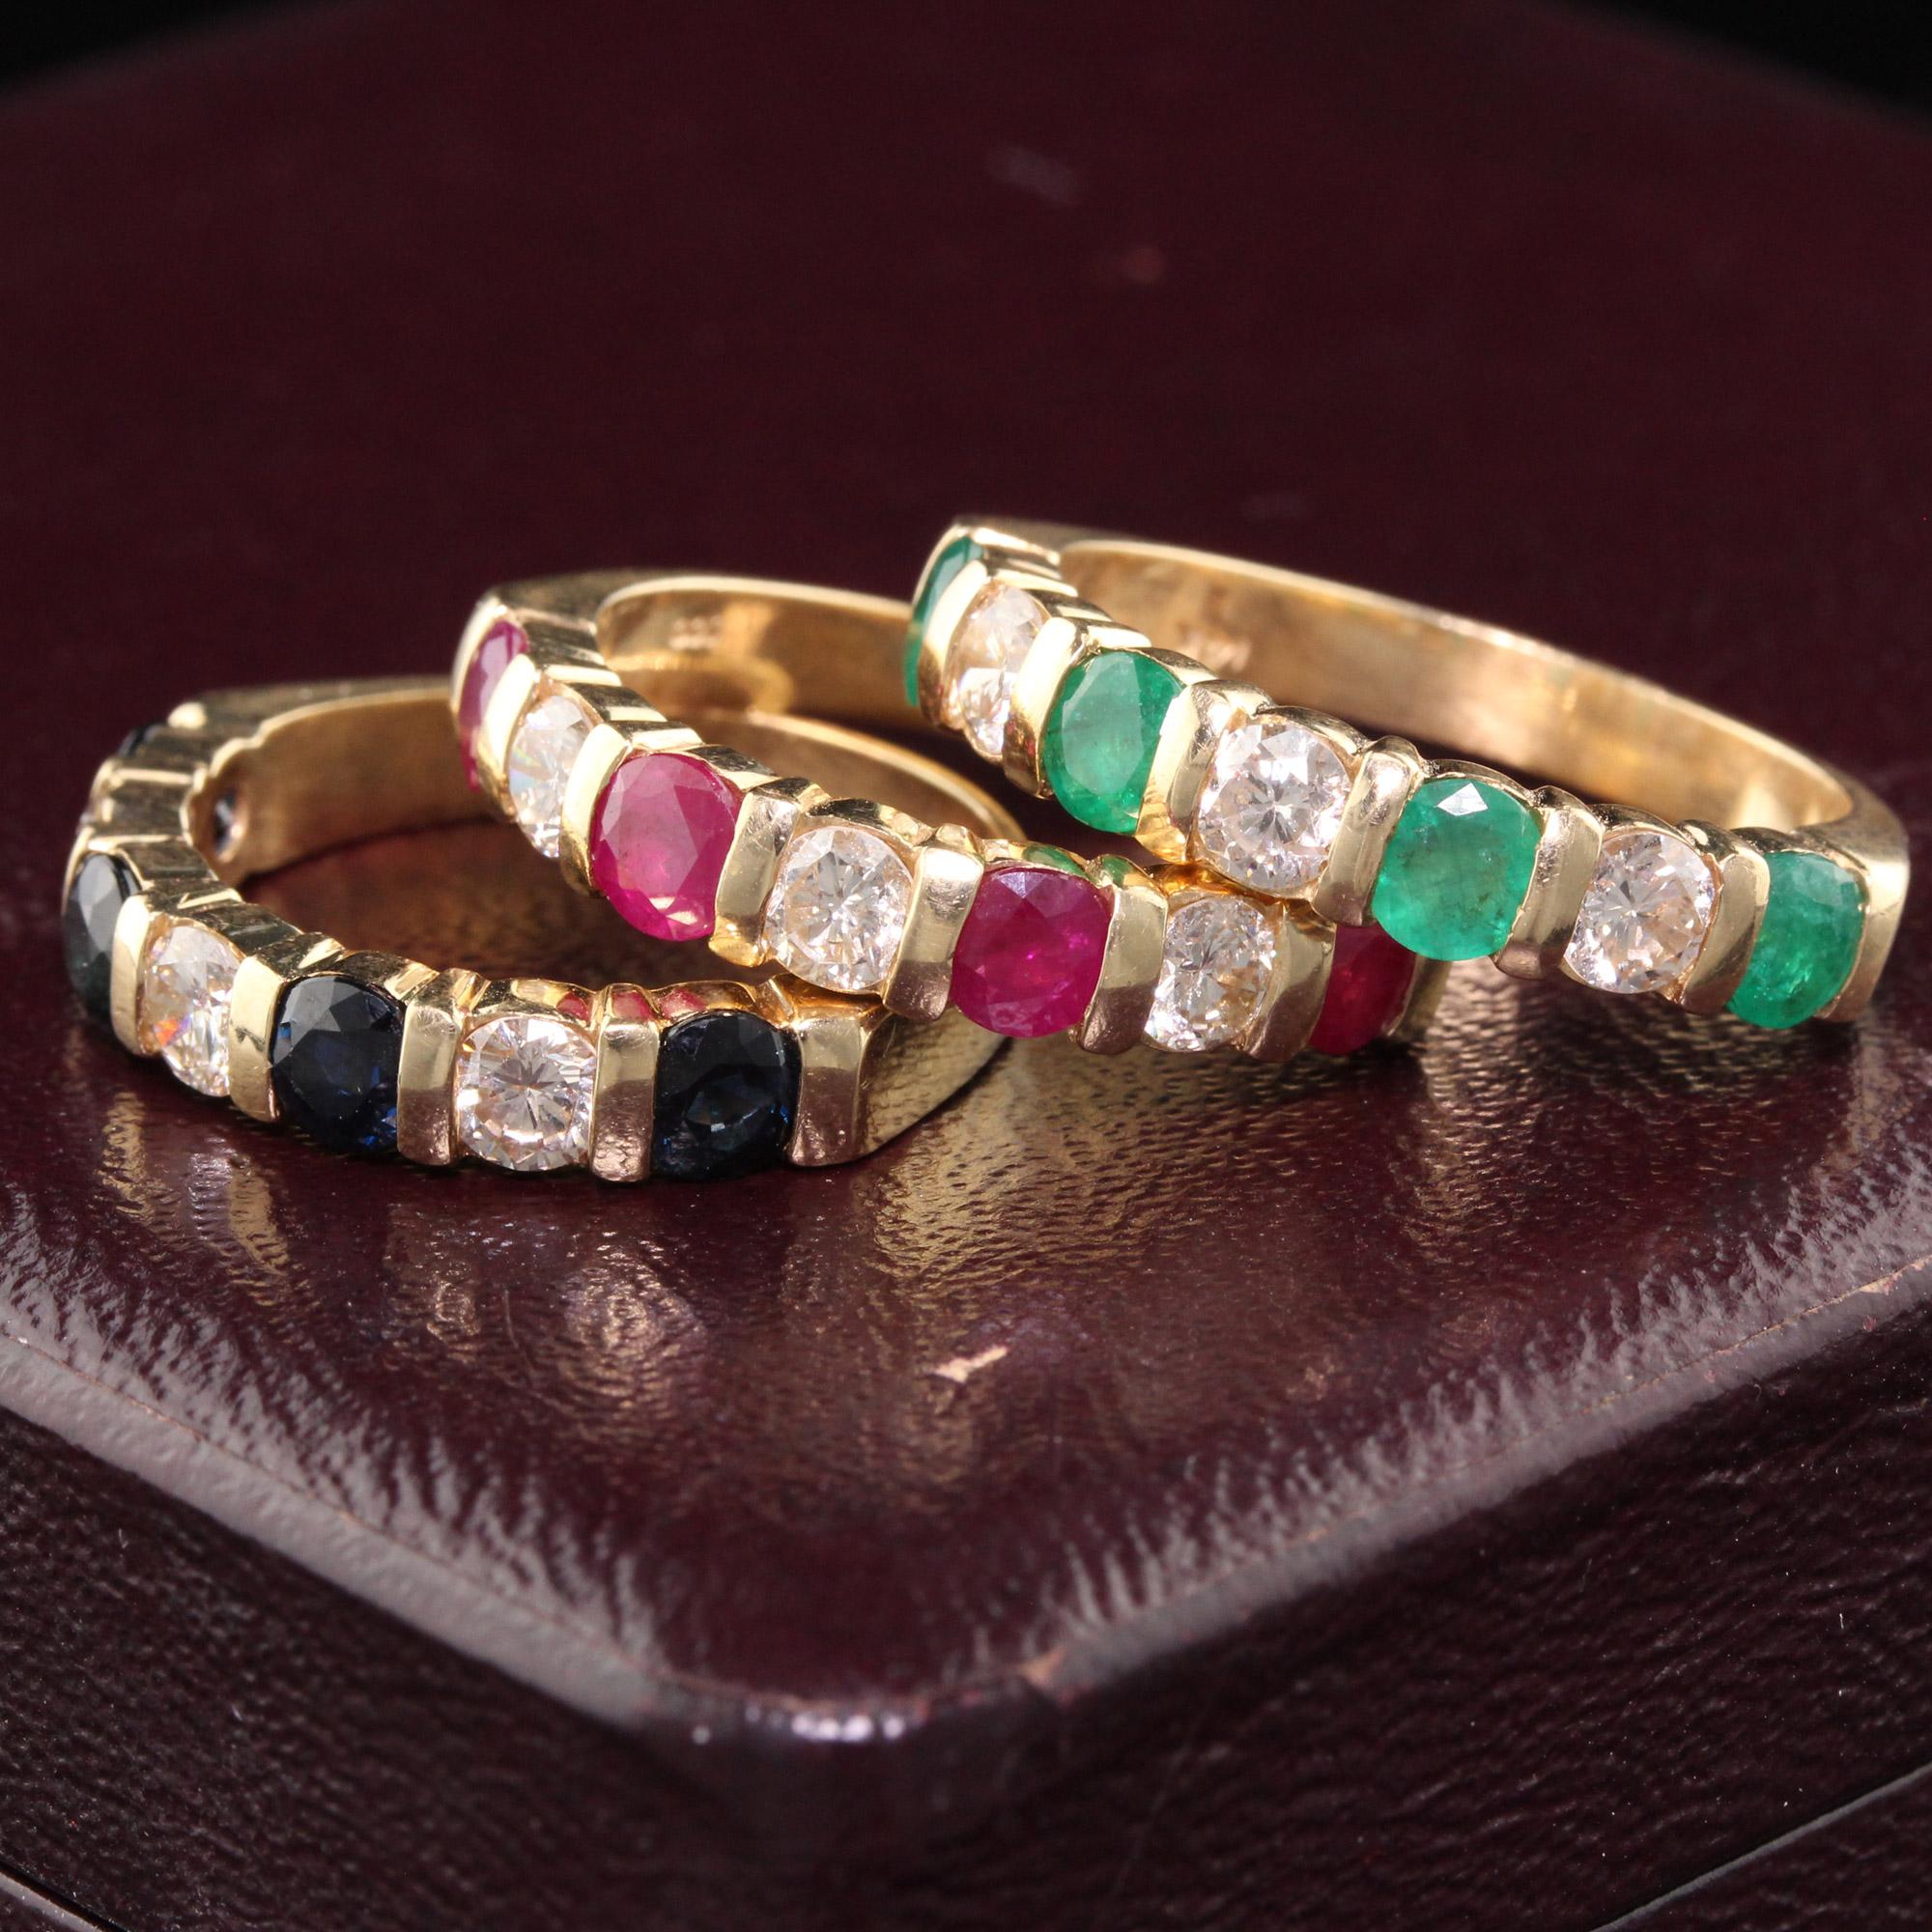 Vintage Estate 14K Yellow Gold Diamond, Sapphire, Ruby & Emerald Stack Rings - Set of 3! Can be worn together or separately!

Metal: 14K Yellow Gold

Weight: 11.8 Grams

Total Diamond Weight: Approximately 1.50 cts

Diamond Color: J

Diamond